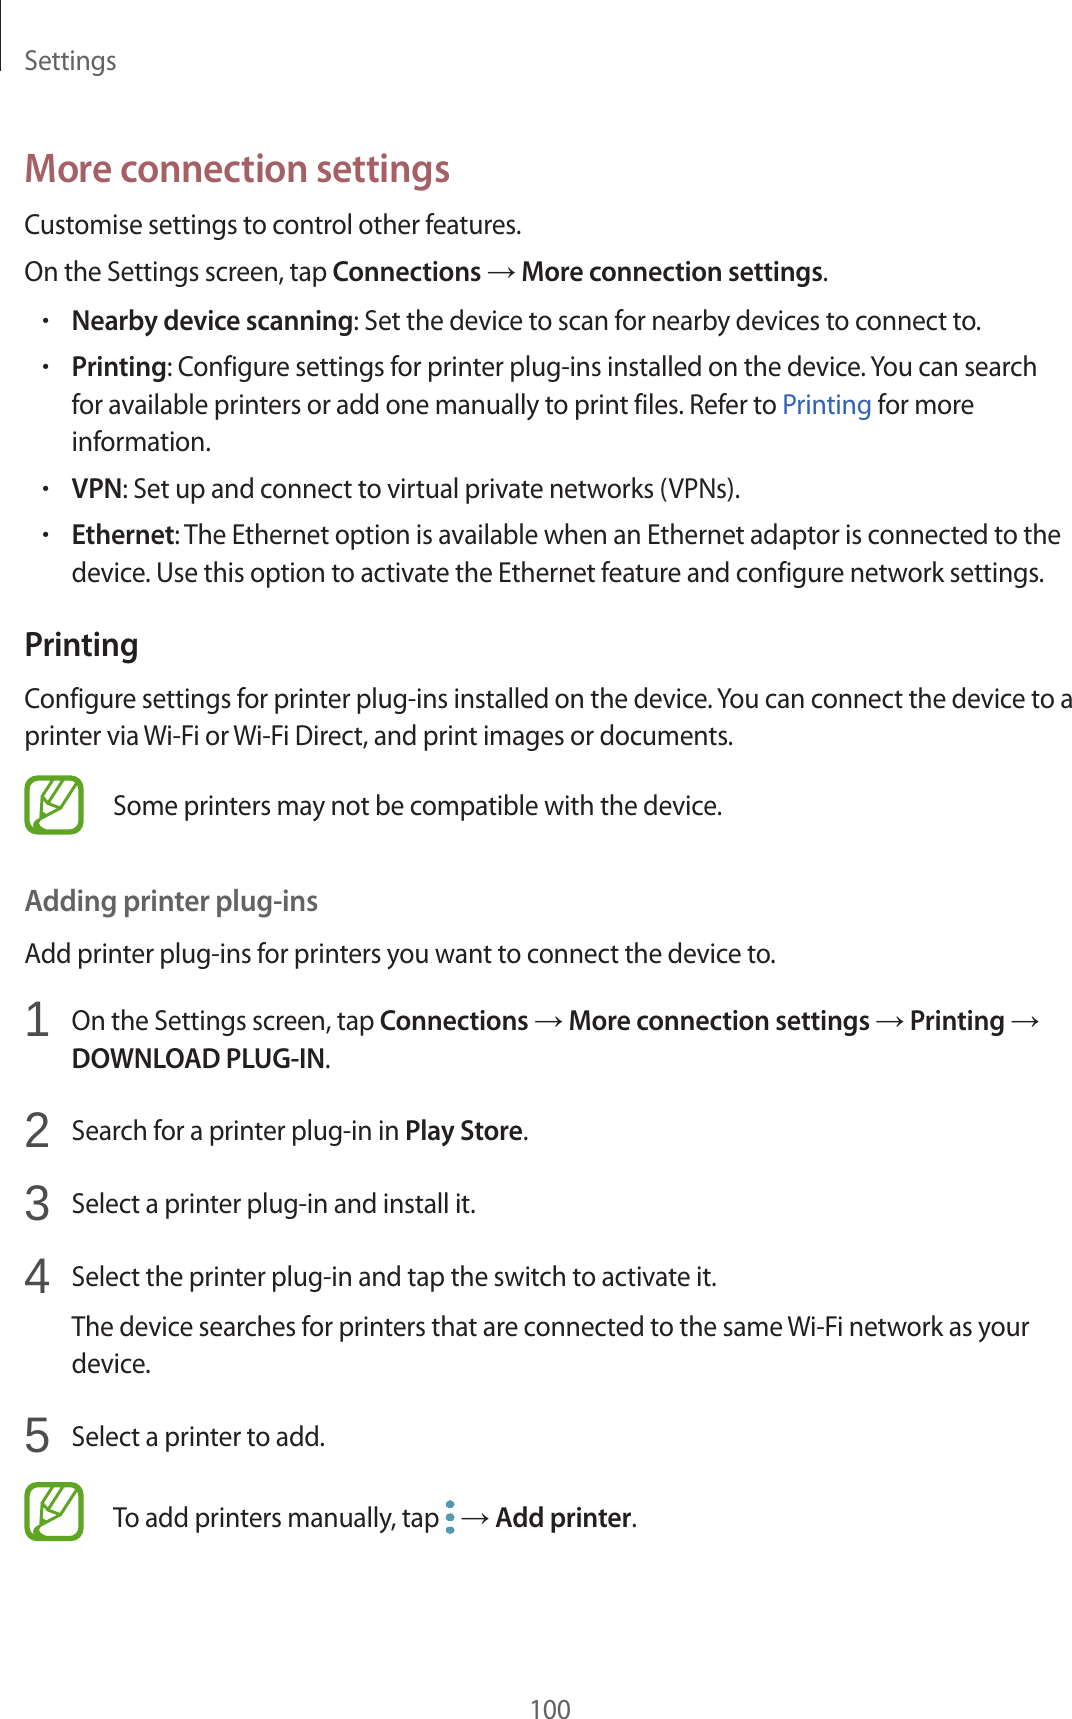 Settings100More connection settingsCustomise settings to control other features.On the Settings screen, tap Connections → More connection settings.•Nearby device scanning: Set the device to scan for nearby devices to connect to.•Printing: Configure settings for printer plug-ins installed on the device. You can search for available printers or add one manually to print files. Refer to Printing for more information.•VPN: Set up and connect to virtual private networks (VPNs).•Ethernet: The Ethernet option is available when an Ethernet adaptor is connected to the device. Use this option to activate the Ethernet feature and configure network settings.PrintingConfigure settings for printer plug-ins installed on the device. You can connect the device to a printer via Wi-Fi or Wi-Fi Direct, and print images or documents.Some printers may not be compatible with the device.Adding printer plug-insAdd printer plug-ins for printers you want to connect the device to.1  On the Settings screen, tap Connections → More connection settings → Printing → DOWNLOAD PLUG-IN.2  Search for a printer plug-in in Play Store.3  Select a printer plug-in and install it.4  Select the printer plug-in and tap the switch to activate it.The device searches for printers that are connected to the same Wi-Fi network as your device.5  Select a printer to add.To add printers manually, tap   → Add printer.